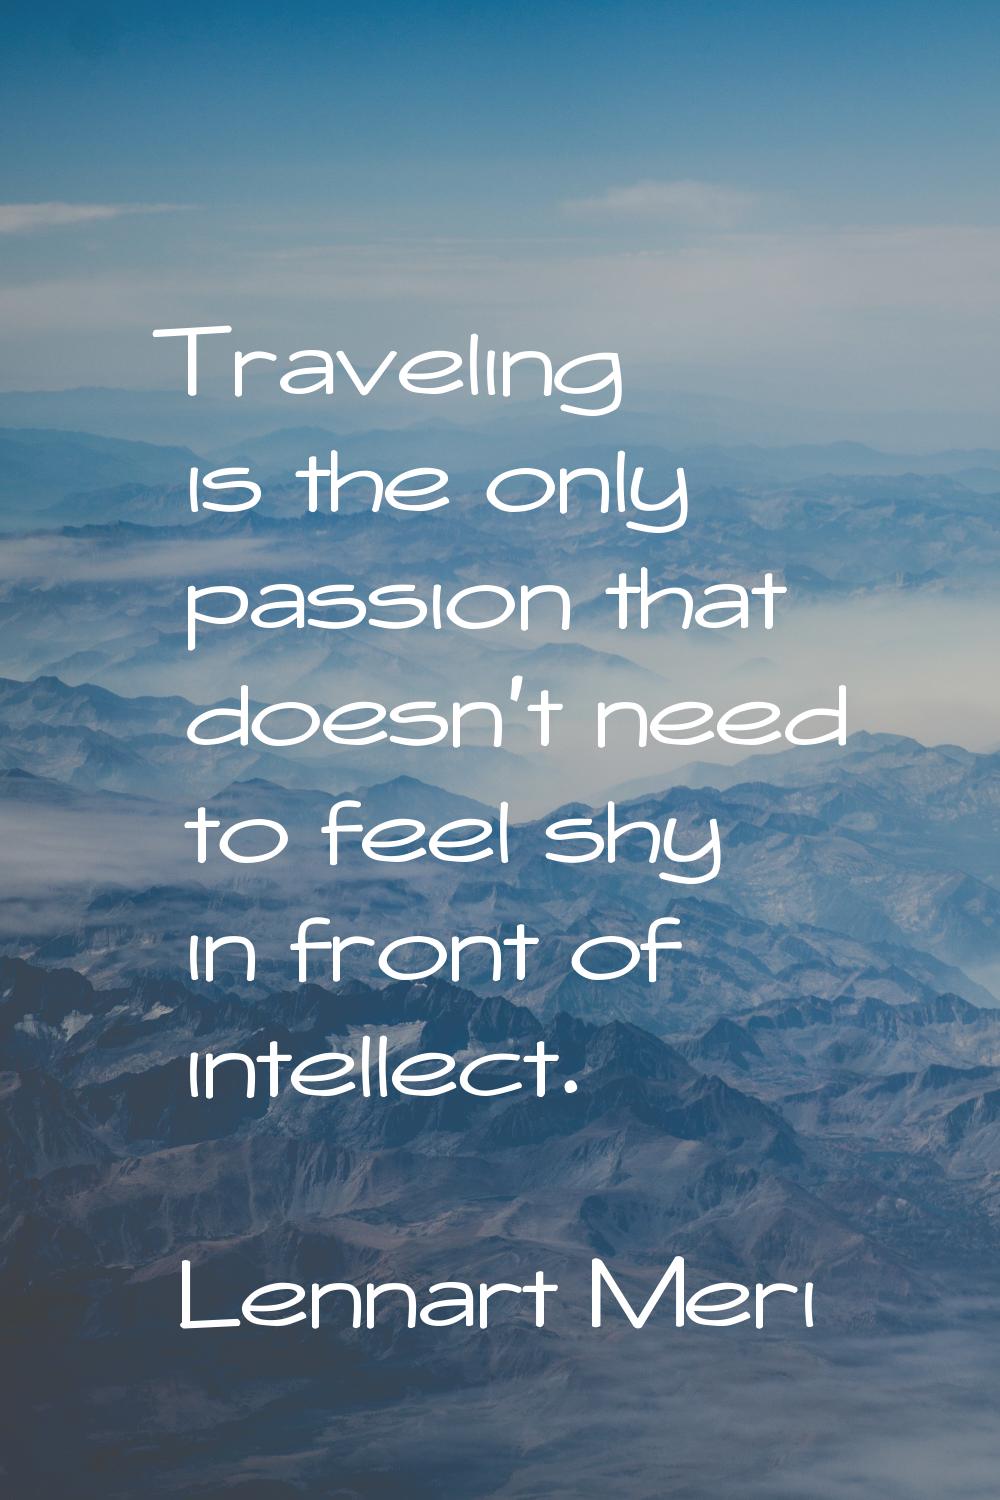 Traveling is the only passion that doesn't need to feel shy in front of intellect.